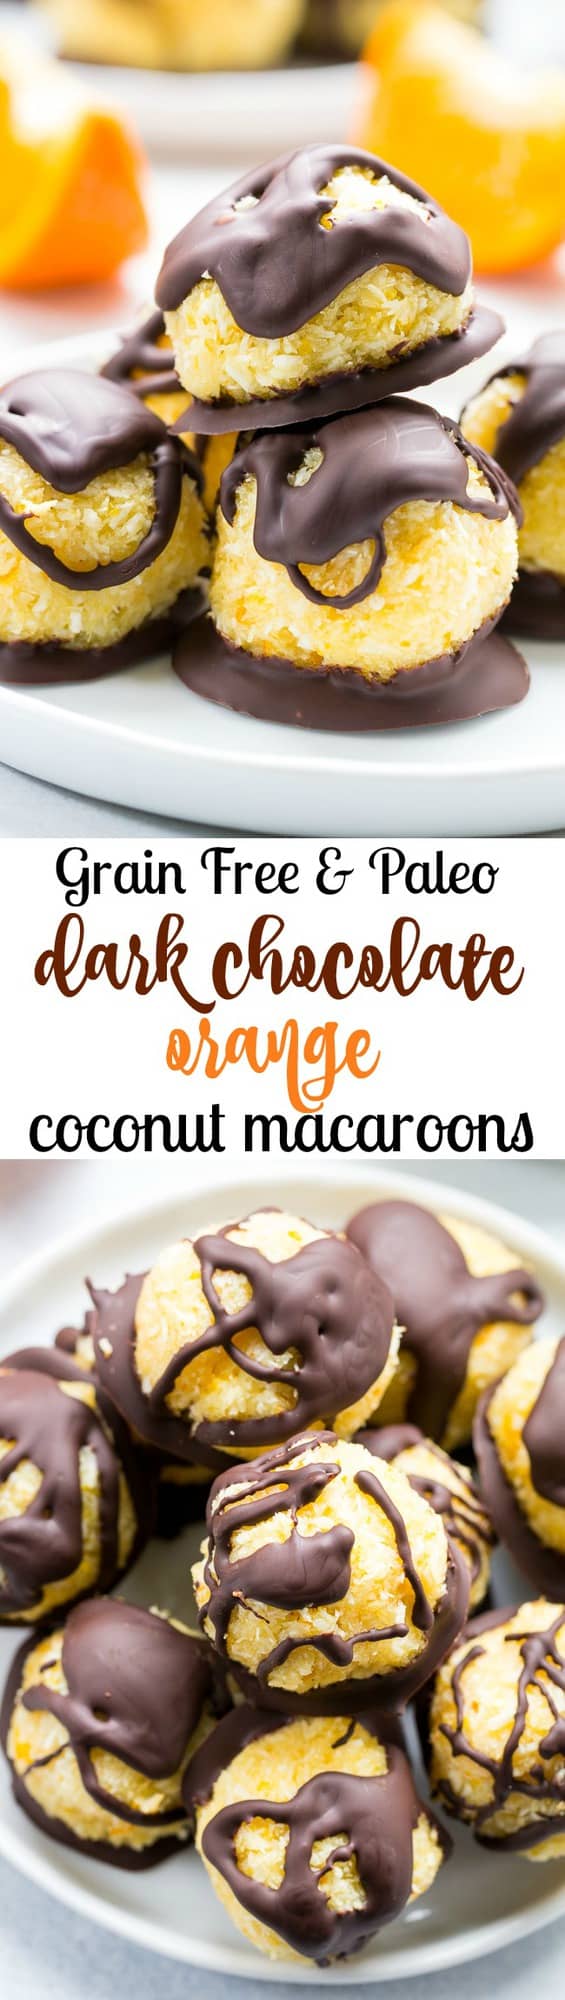 Chewy and sweet orange coconut macaroons are dipped in dark chocolate for a healthy yet decadent tasting dessert! Easy and fun to make, these delicious macaroons are gluten free, dairy free and Paleo.